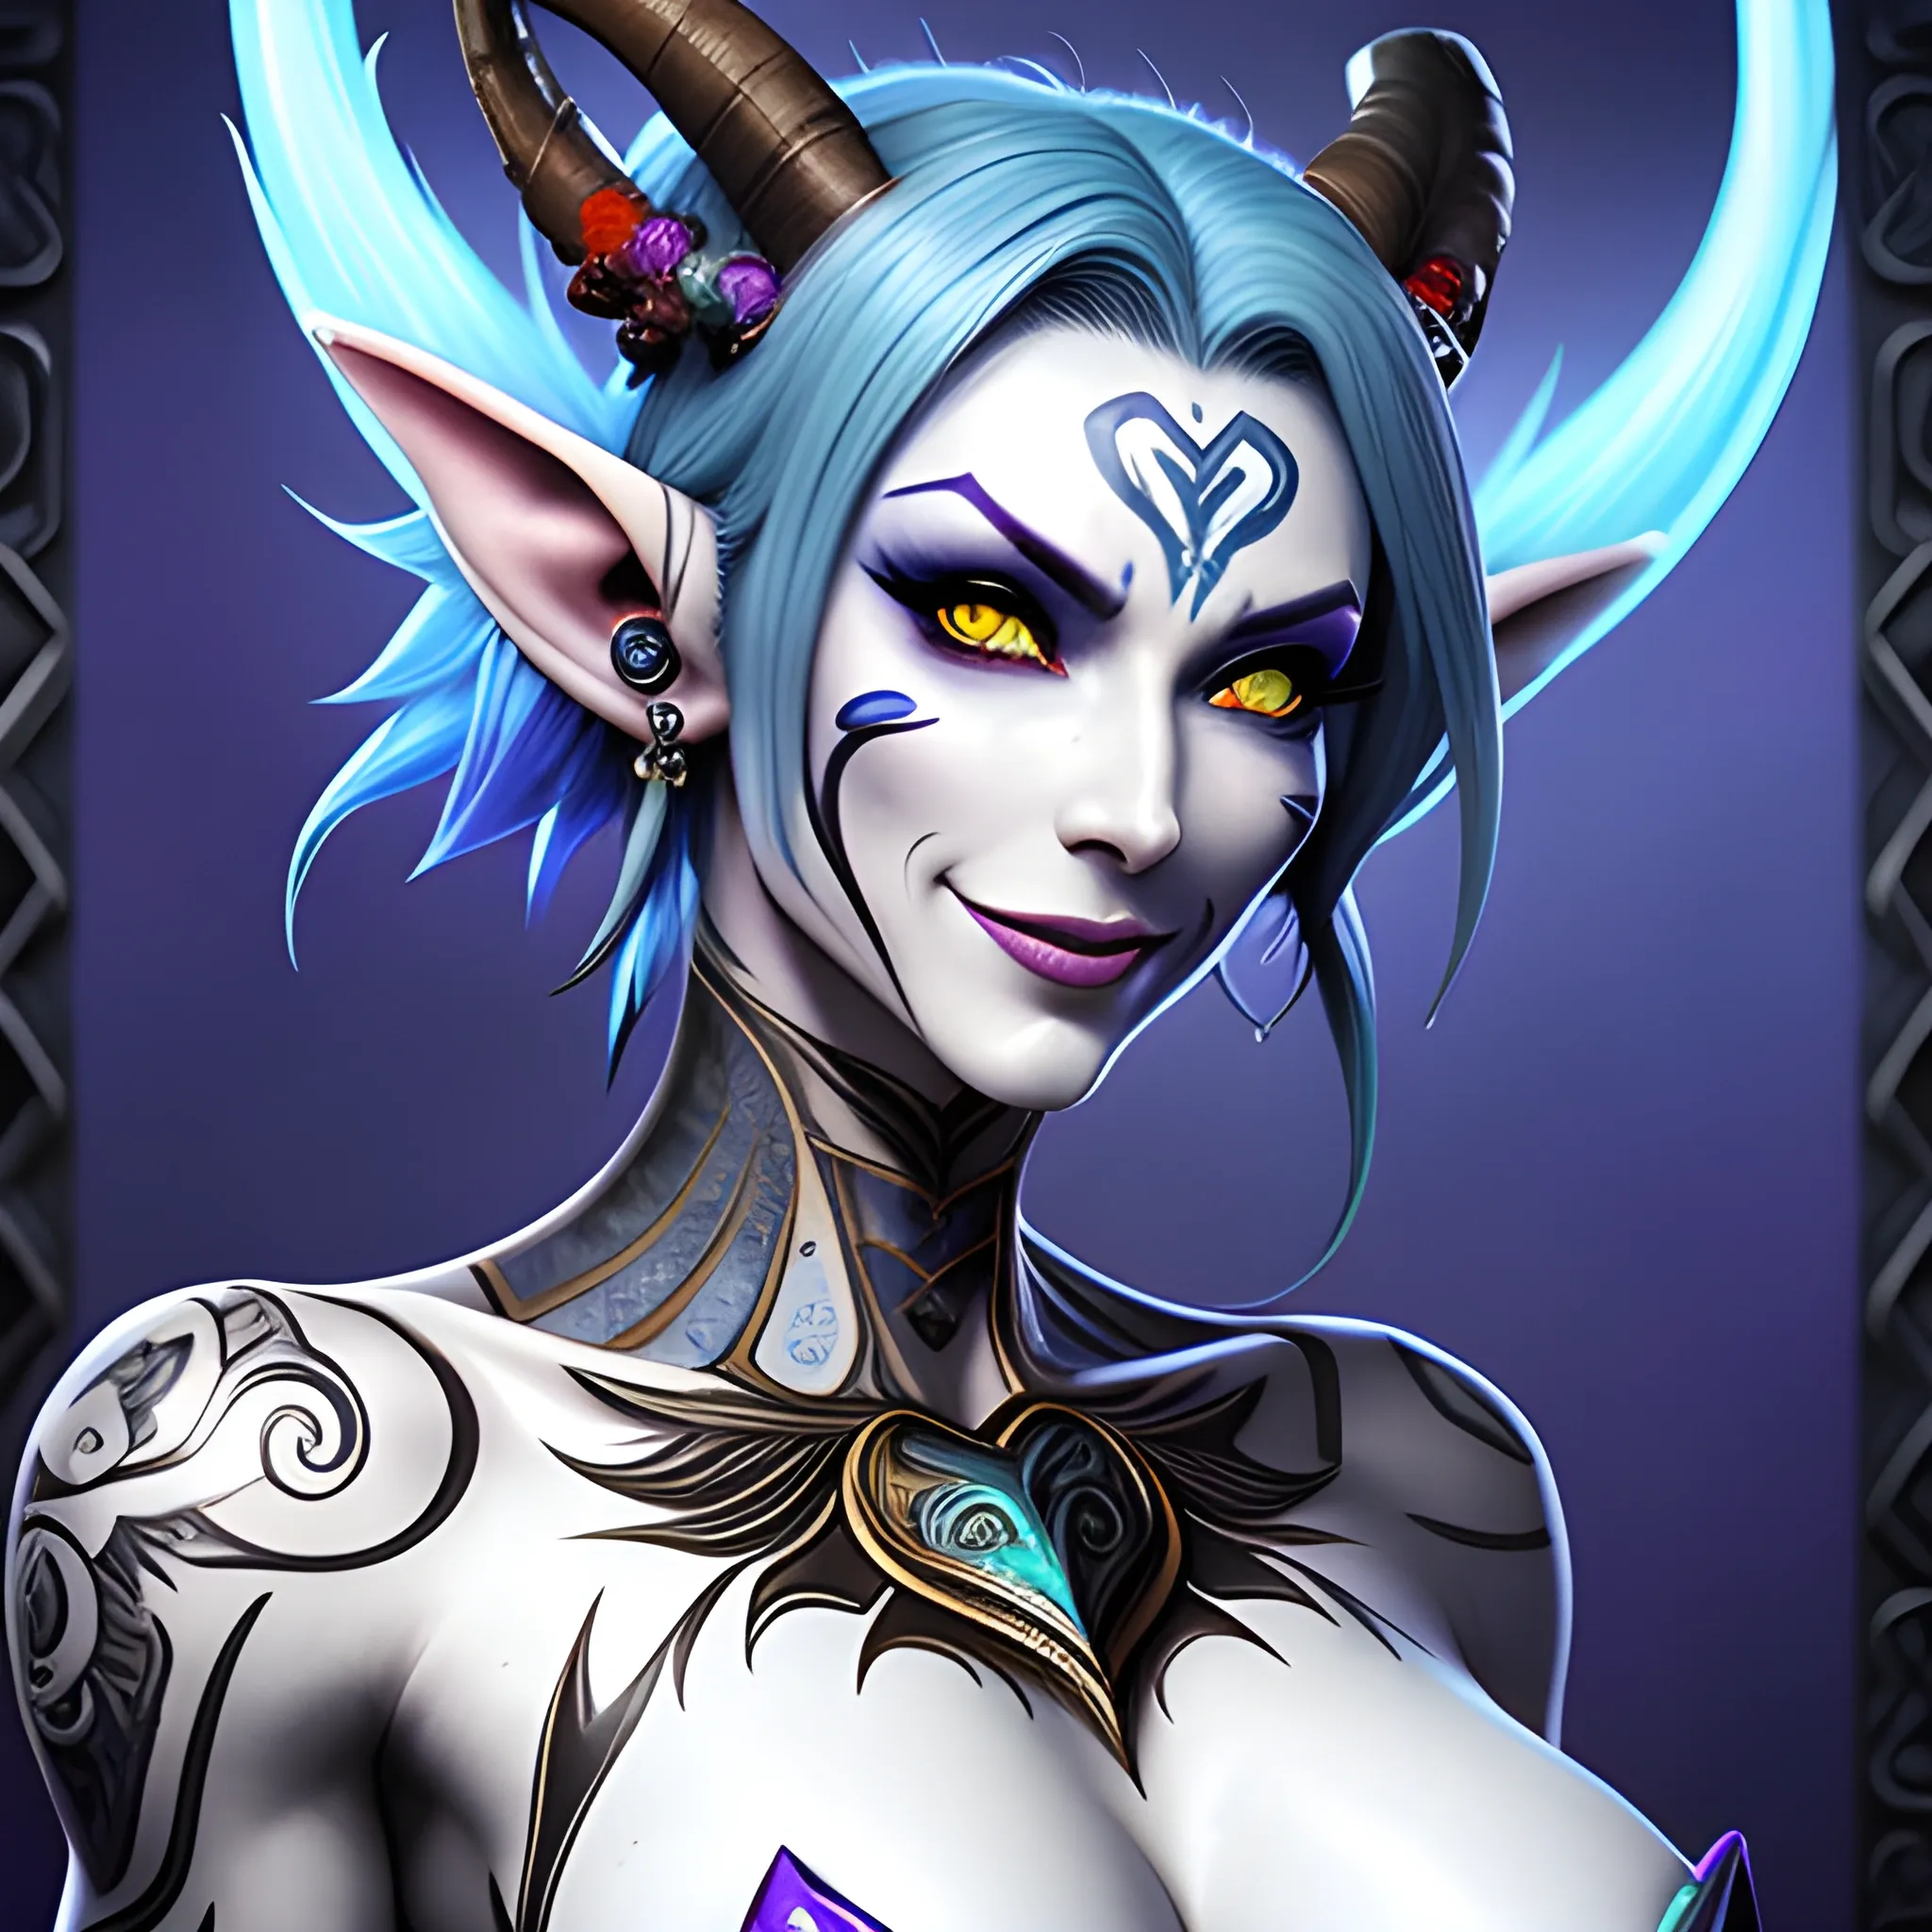 hyper detailed hyper quality hyper beautiful hyper soft features hyper slender hyper extremely slim blue skin tone feminine male elf satyr body Mollymauk Tealeaf blue skin boy character from critical roll fan art, hyper dynamic friendly smile, hyper dynamic smile, hyper extremely detailed face piercings and ear piercings, hyper extremely detailed black and red tattoos on chest and arms, hyper extremely detailed face piercings and ear piercings, hyper blue skin tone, hyper dynamic big smile, male elf satyr with completely blue skin tone, hyper black eye makeup, hyper dynamic hyper detailed smirk, hyper blue skin tone elf satyr boy Mollymauk Tealeaf, hyper soft features, naymora by kurizeria art on Pinterest, hyper soft weak slender body, Mollymauk Tealeaf hyper detailed character art from critical roll, hyper detailed hyper beautiful Mollymauk Tealeaf blue skin elf boy FAN ART GALLERY: Nine | Critical Role critrole.com, Mollymauk Tealeaf blue skin tone elf satyr boy, hyper dynamic long flowing black hair, hyper dynamic big smile, Hyper dynamic charming smile, hyper smooth blue skin tone, art hyper beautiful anime style hyper detailed anime style hyper dynamic blue skin tone elf satyr character, hyper beautiful anime style, hyper dynamic facial expressions, hyper dynamic smile, hyper dynamic full body shot, hyper dynamic full upper body view, zoomed out, hyper dynamic zoomed out, hyper detailed abs, hyper extremely detailed black and red tattoos on chest and arms, hyper extremely detailed face piercings and ear piercings, anime style drawing, Fantastic painting portrait masterpiece by Karol Bak, Zhaoming Wu, Akihito Yoshida, bokeh, hyper detailed magical background, HD, 8k, photography